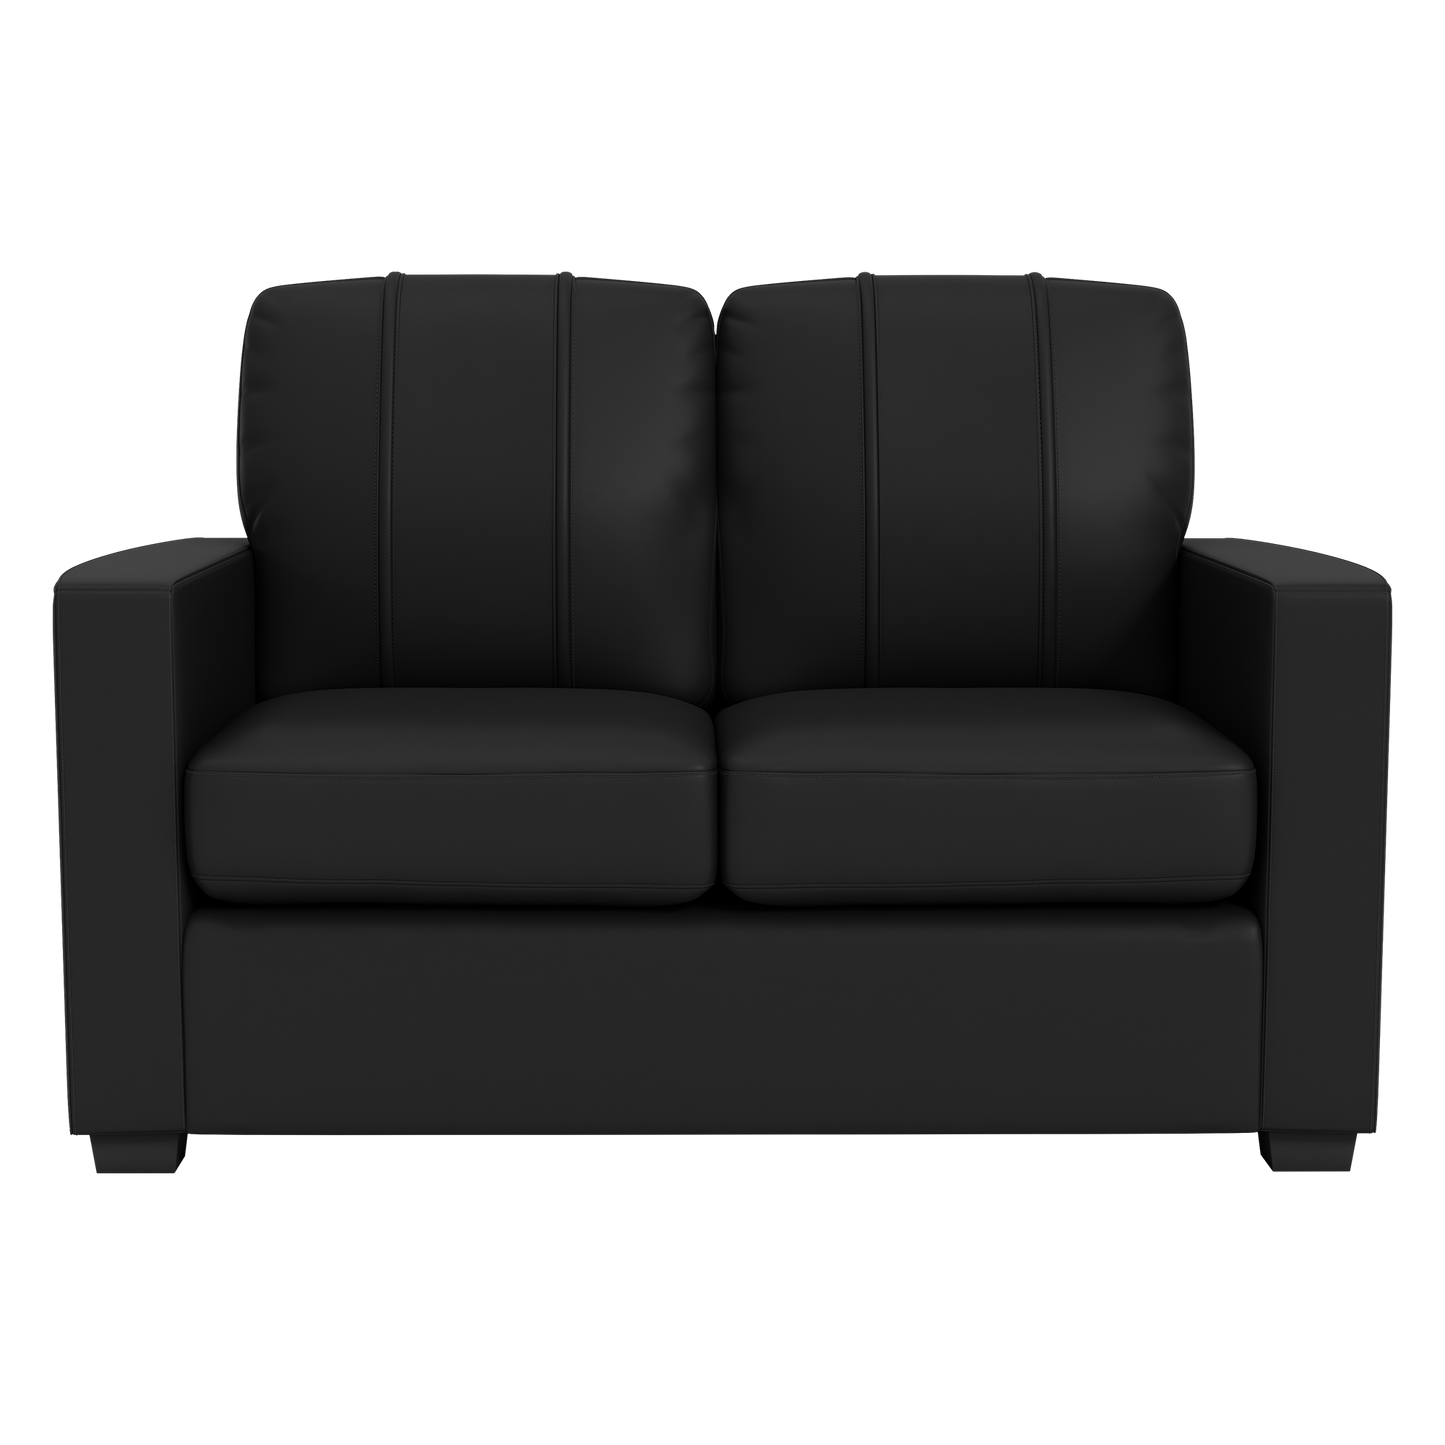 Silver Loveseat with Buick Logo